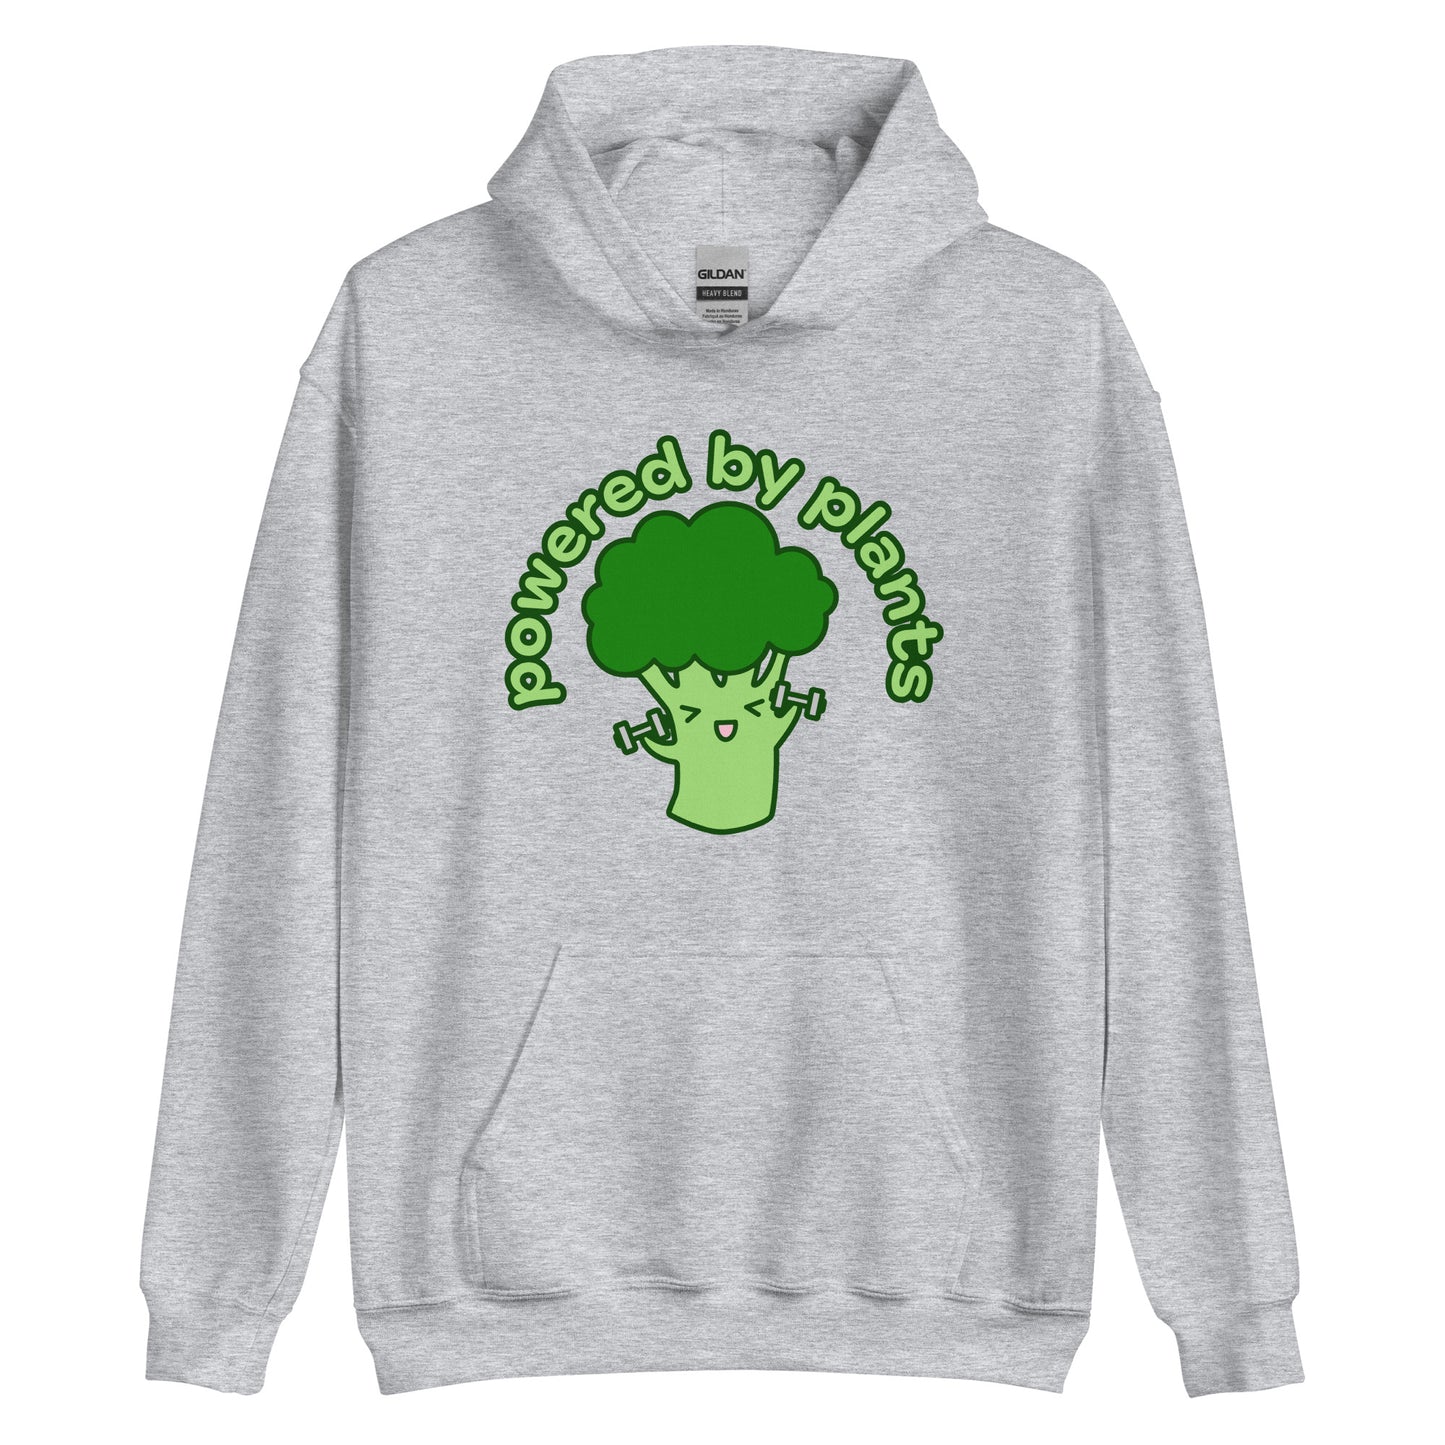 A grey hooded sweatshirt featuring an illustration of a cartoon broccoli character. The broccoli is excitedly lifting weights, and text in an arc above the broccoli reads "powered by plants".